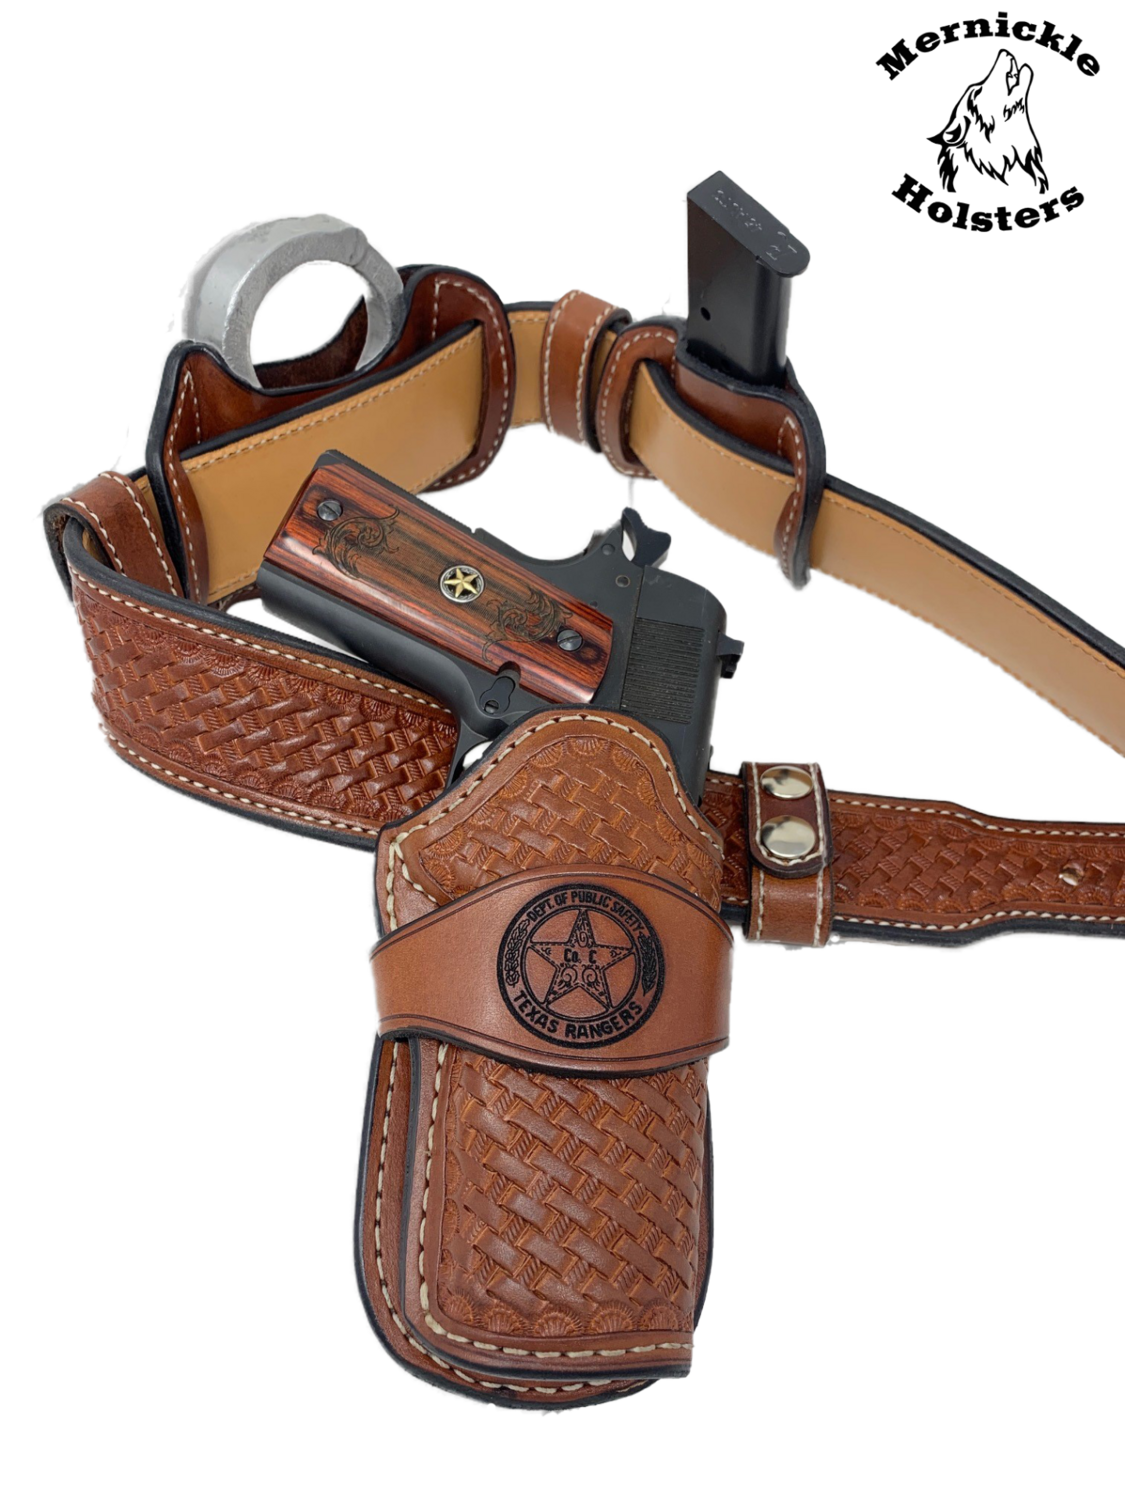 Officaial Thin Blue Line Holsters Semi-Automatic Leather Holster